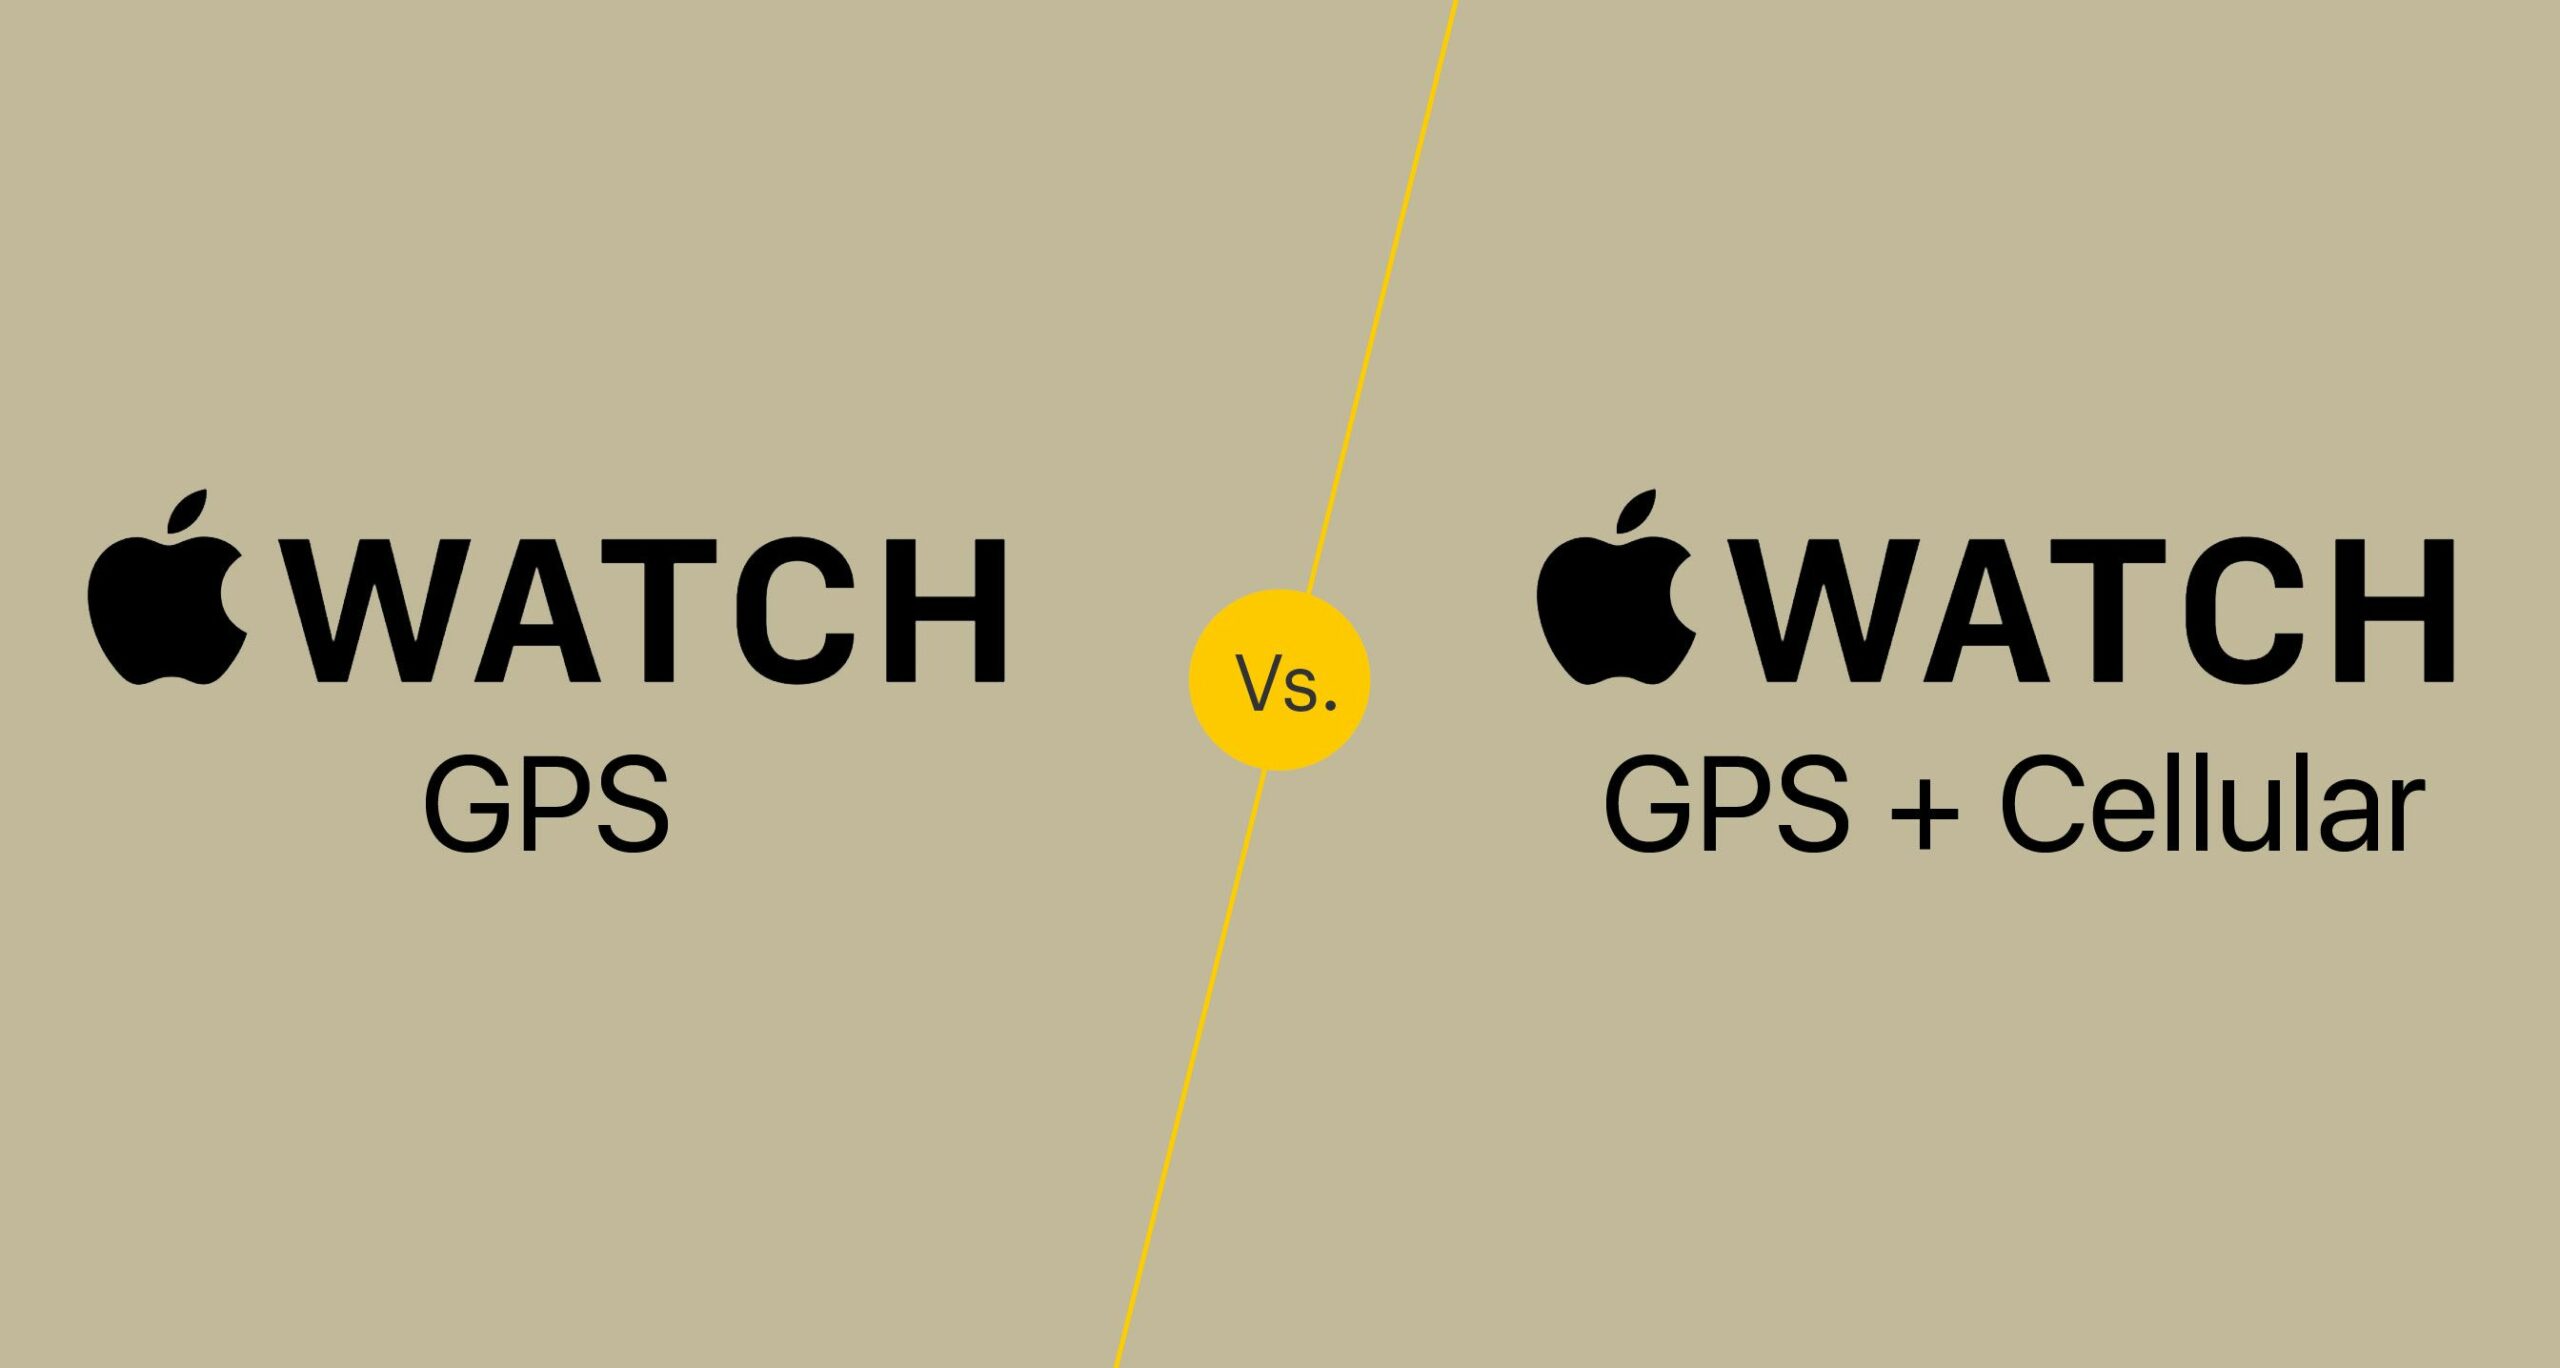 001 apple watch gps vs cellular apple watch 4774783 760199d53cce4ed2a5849a6104b87c07 scaled